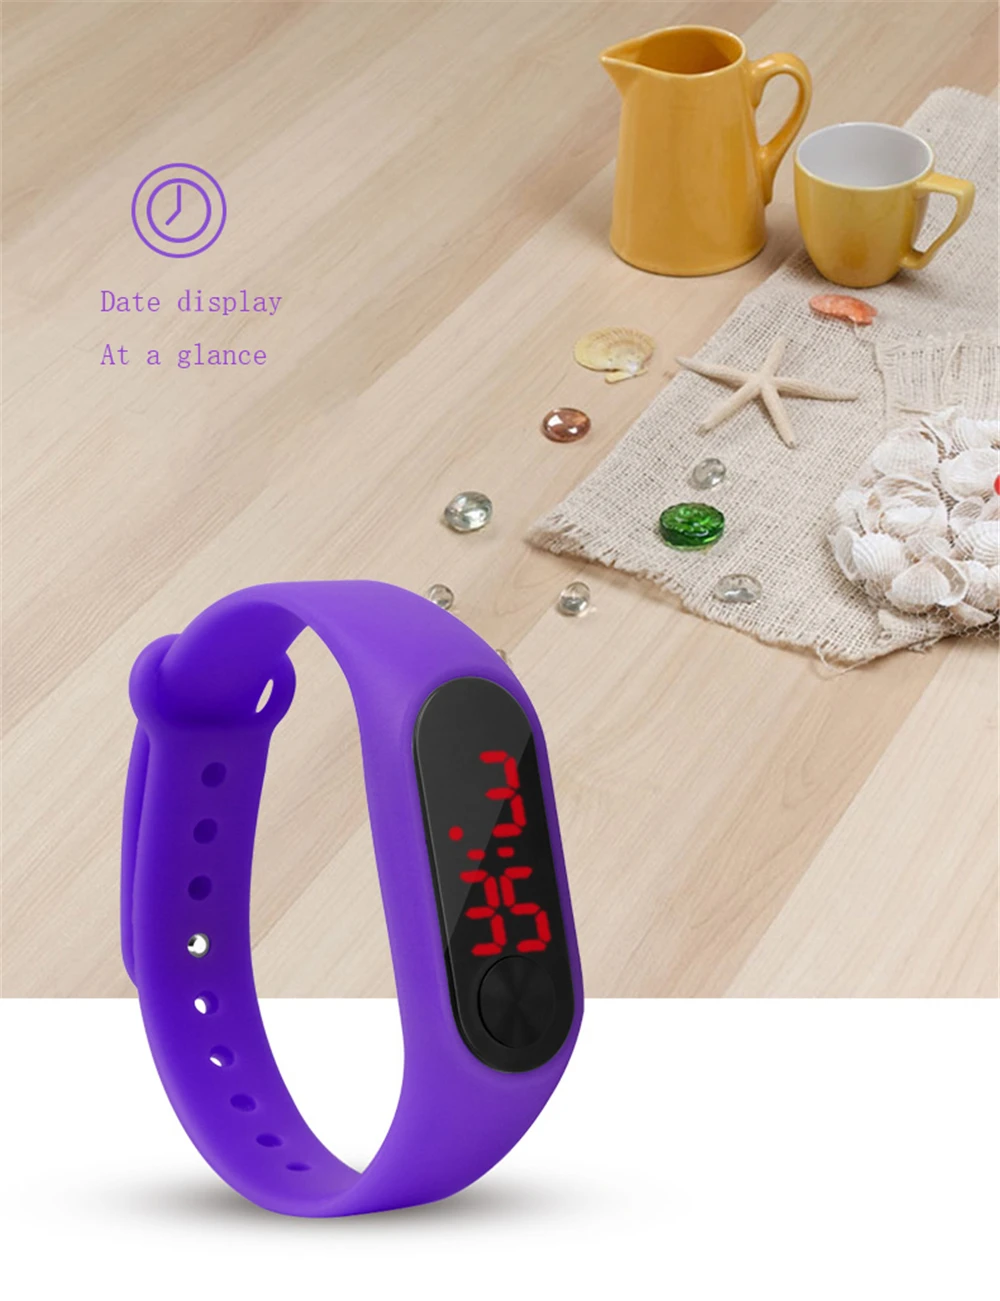 Children's Watches LED Digital Wrist Watch Kids Outdoor Sports Watch Candy Color Boys Girls Electronic Date Clock Birthday Gifts(12)